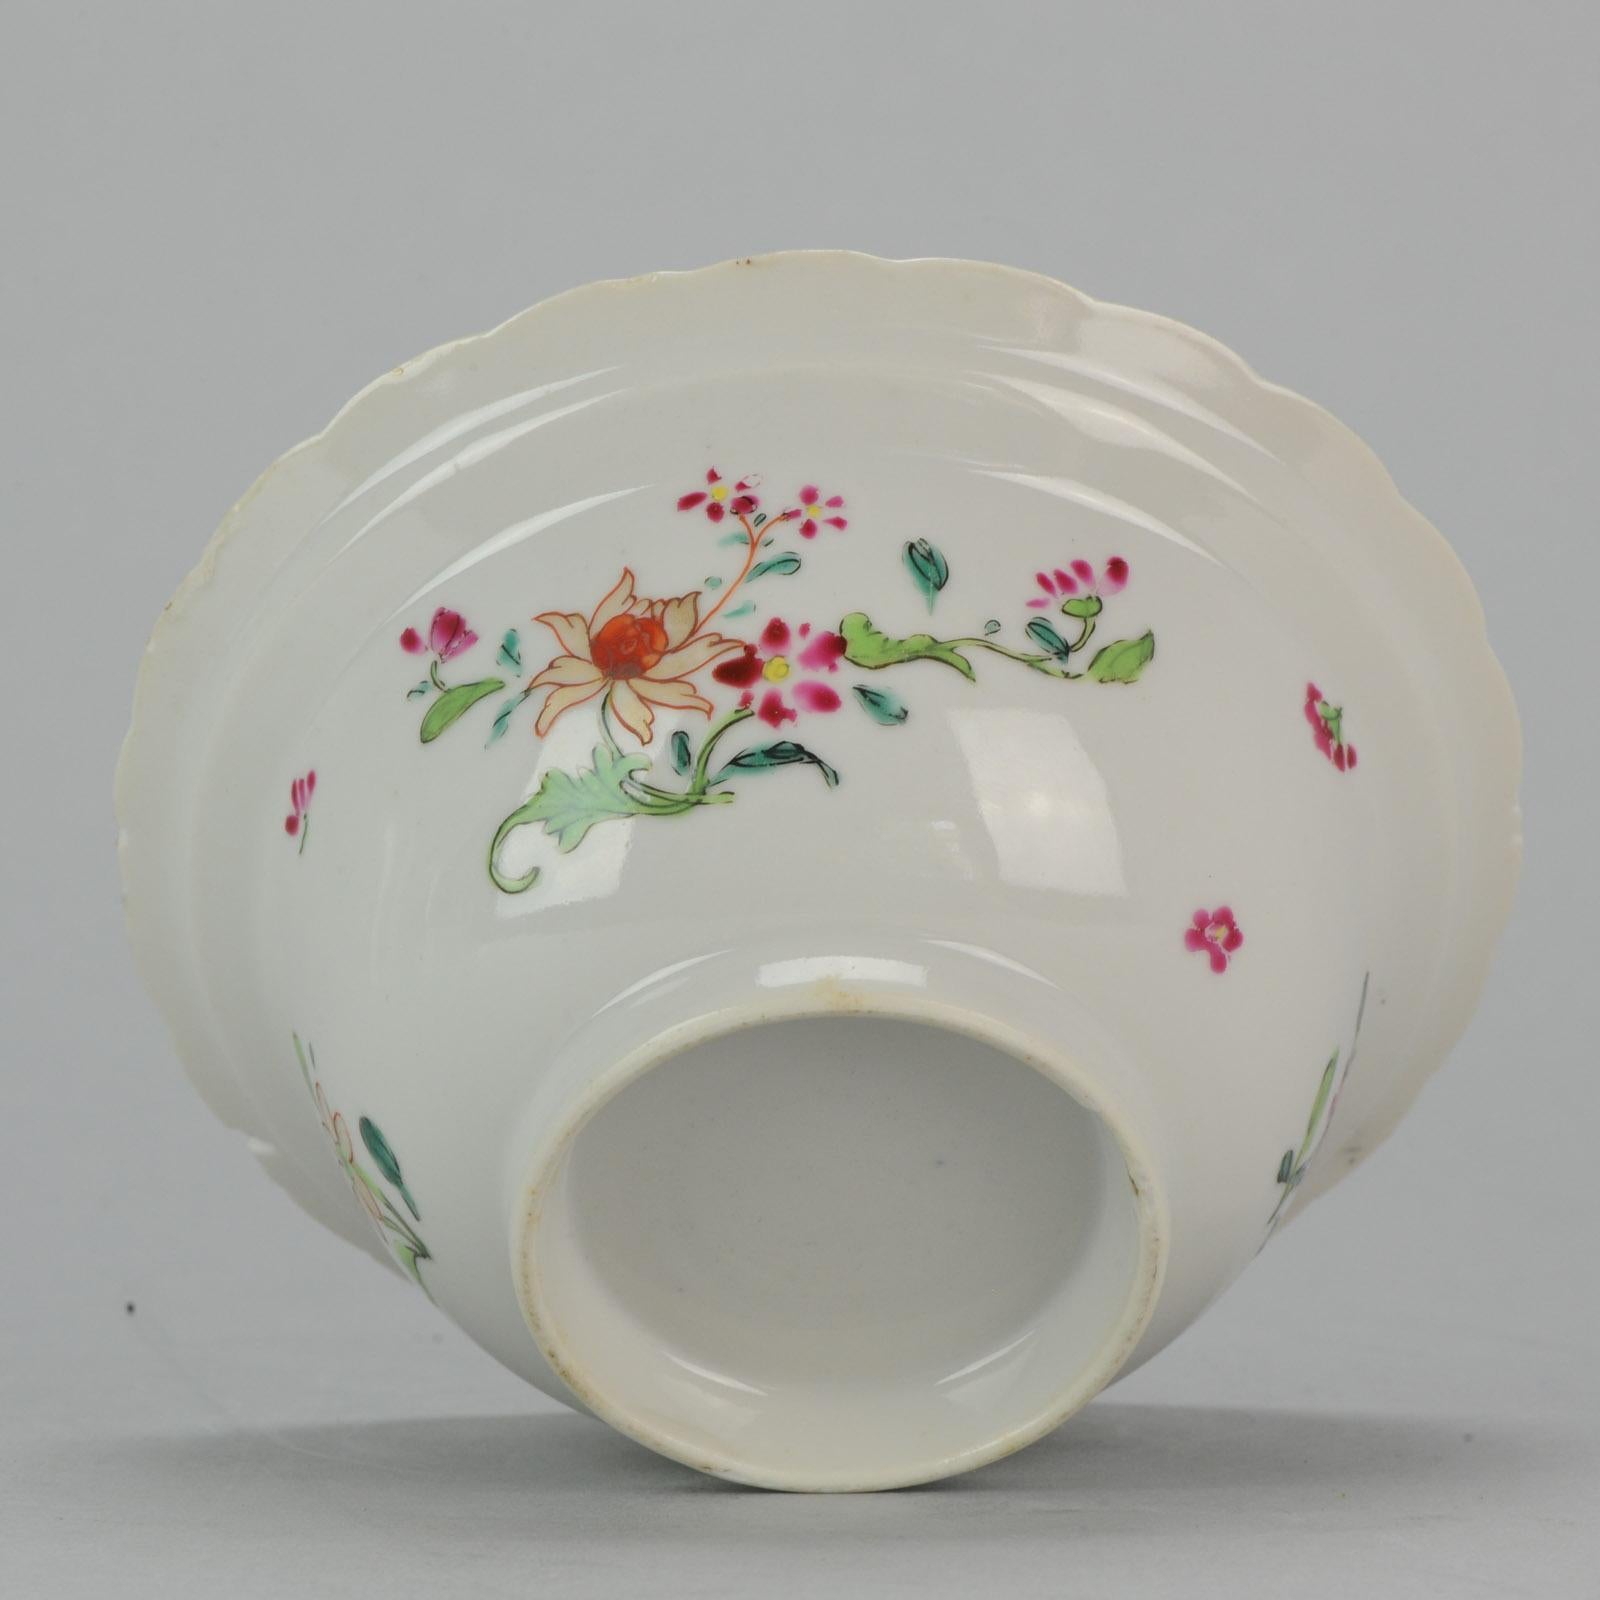 Antique Chinese Porcleain Klapmuts Famille Rose Flowers Dish Rare, 18th Century In Good Condition For Sale In Amsterdam, Noord Holland